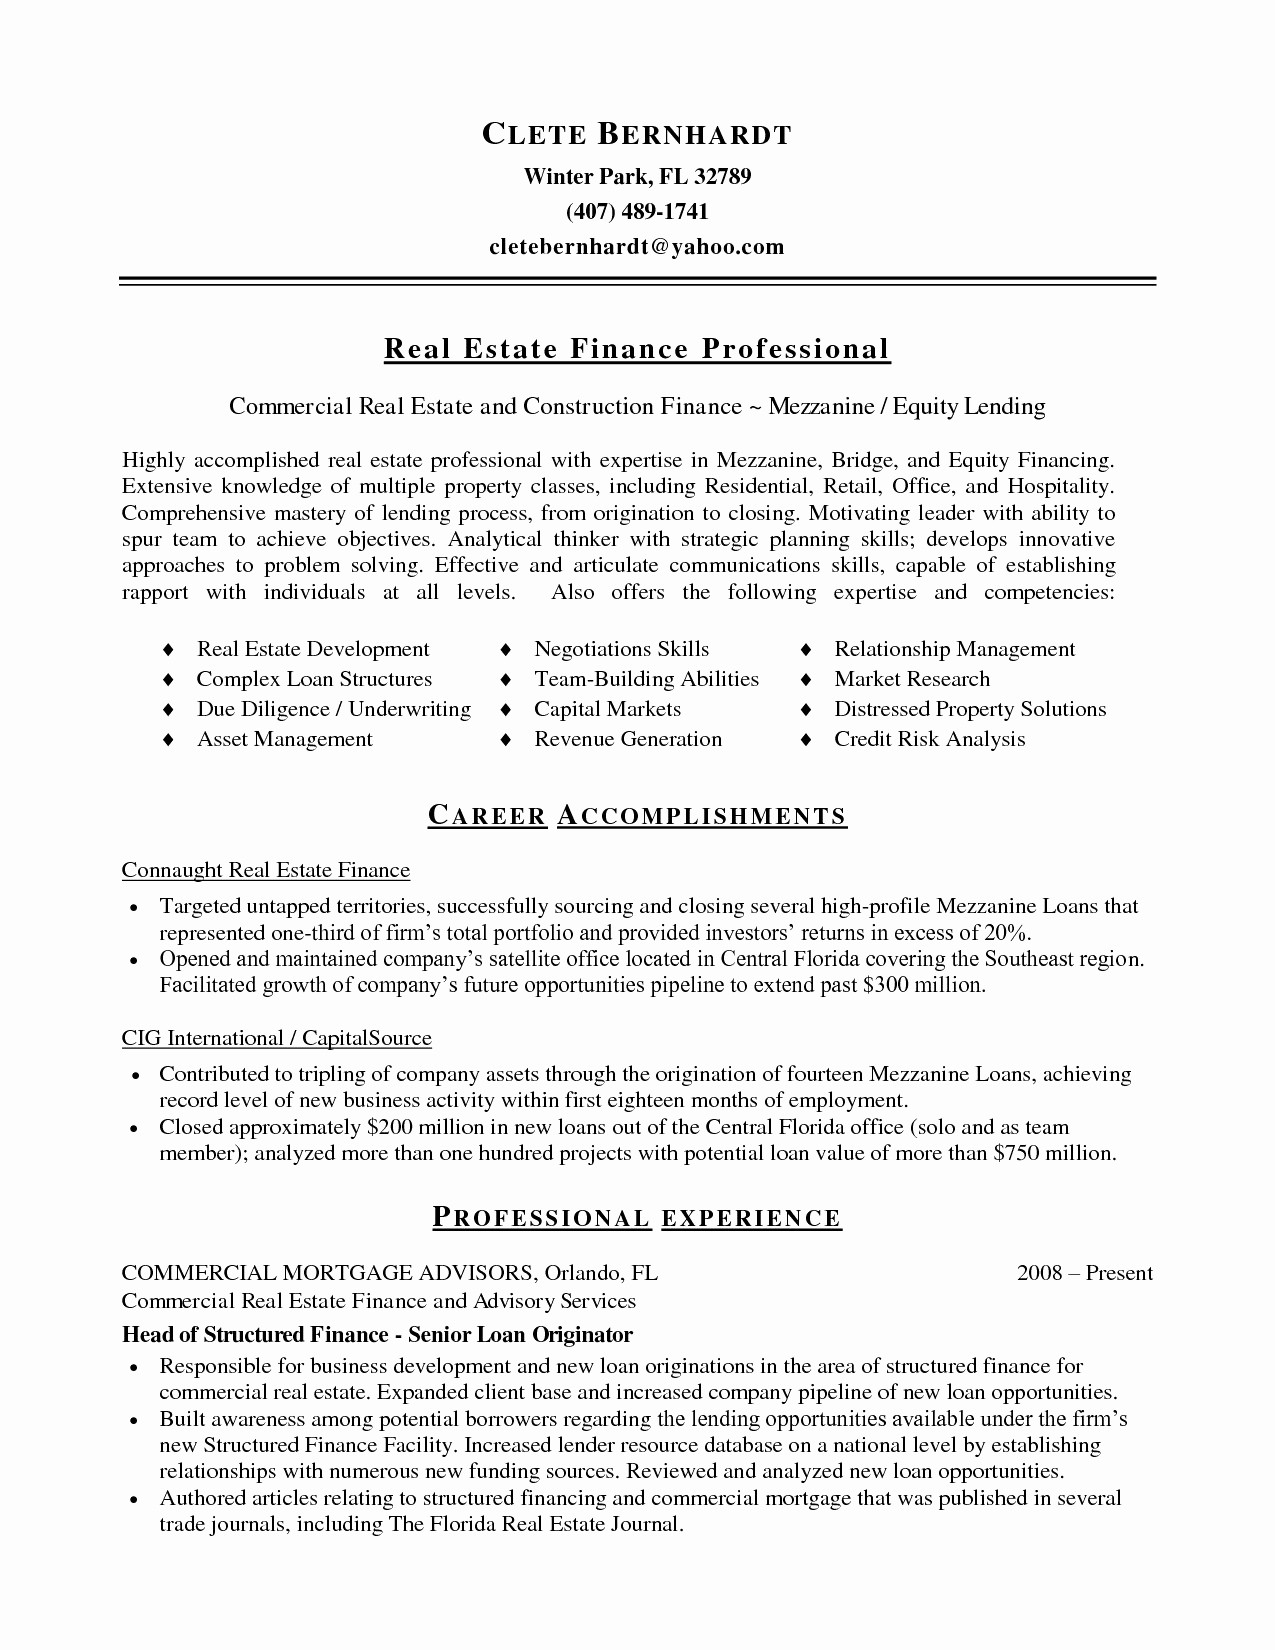 sample resume for real estate agent no experience